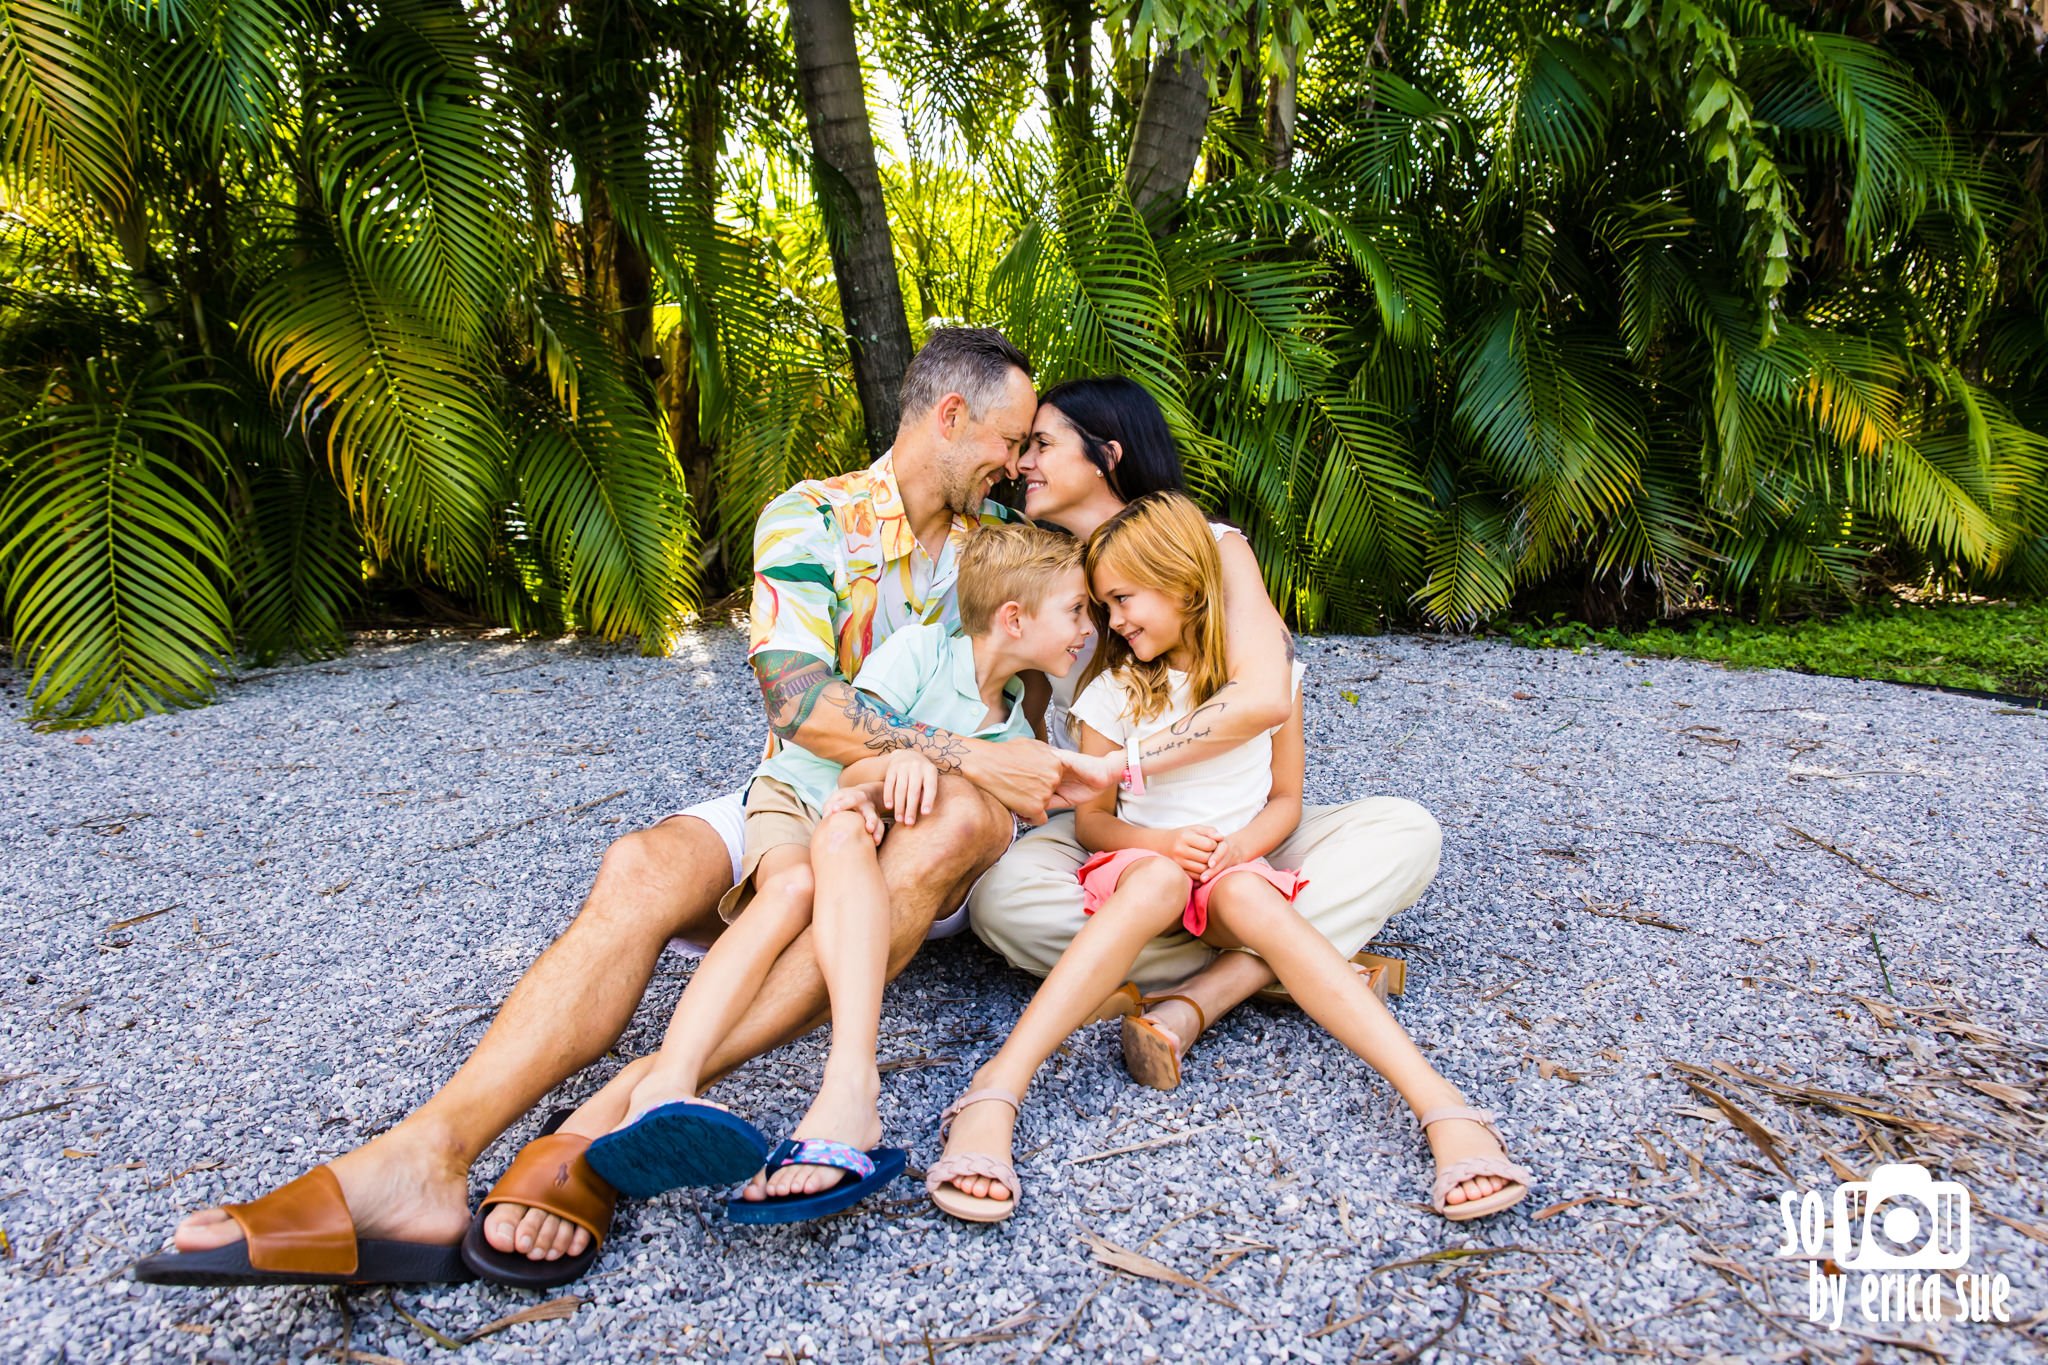 3-jury-fam-at-home-lifestyle-family-photographer-miami-fl-so-you-by-erica-sue-ES2_7922.jpg